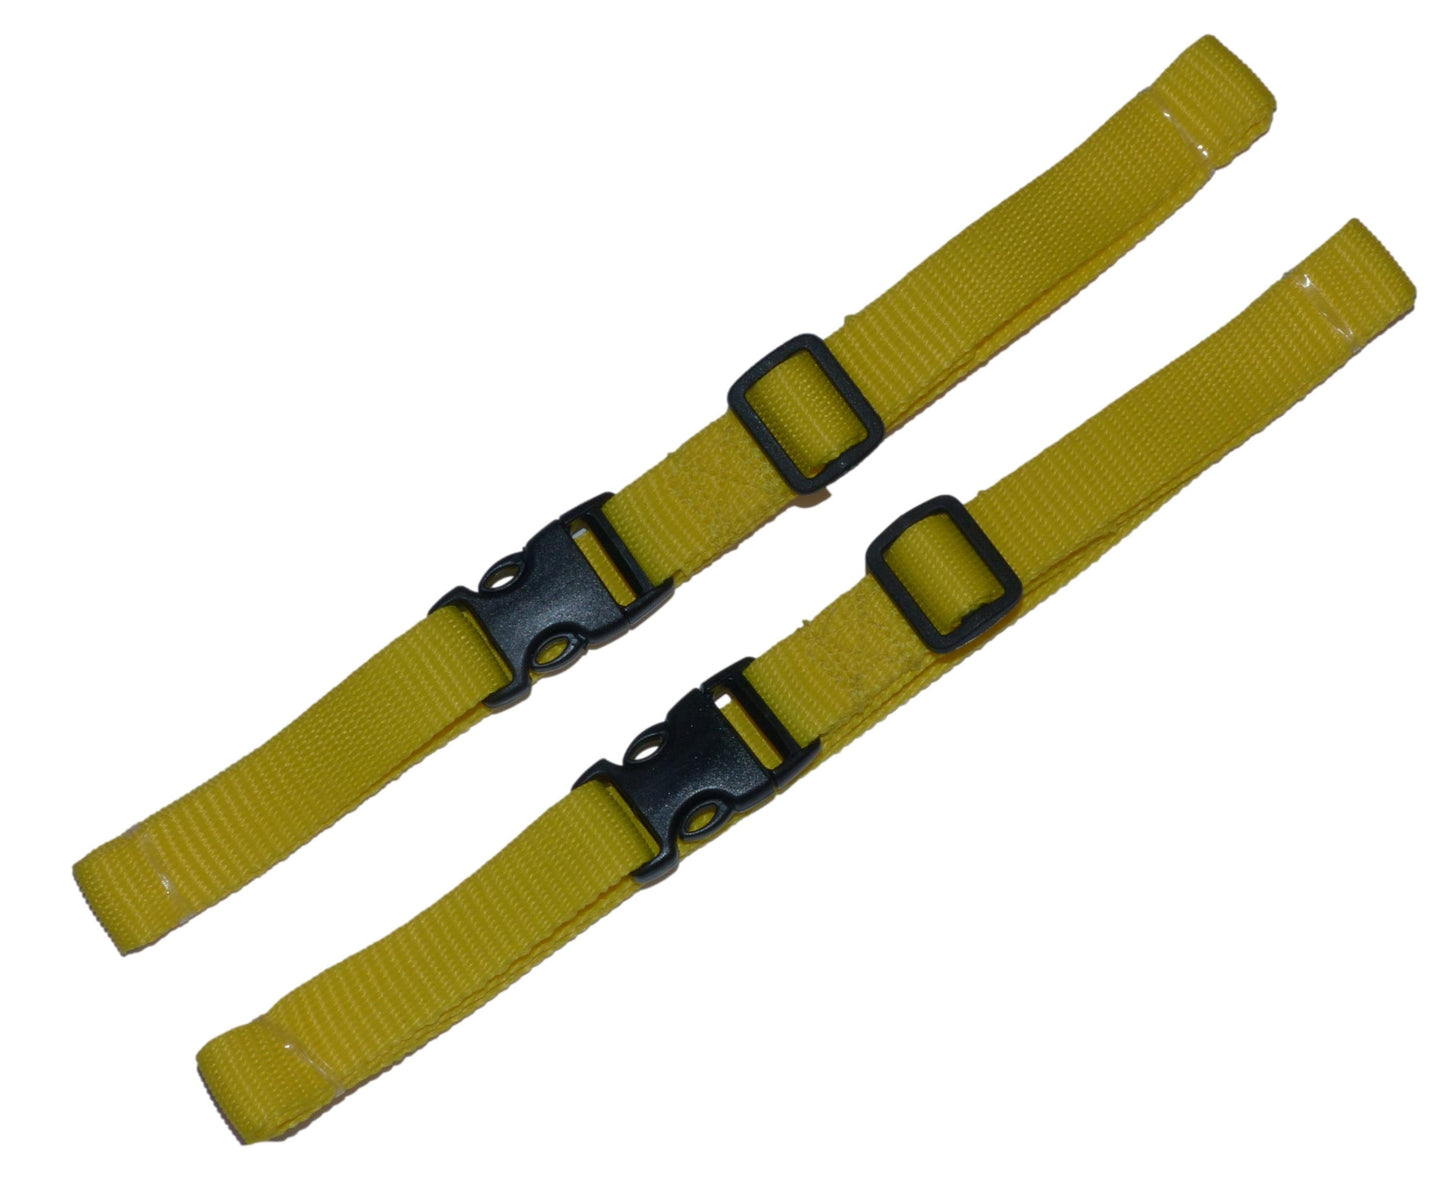 Benristraps 19mm Webbing Strap with Quick Release & Length-Adjusting Buckles (Pair) in yellow (3)